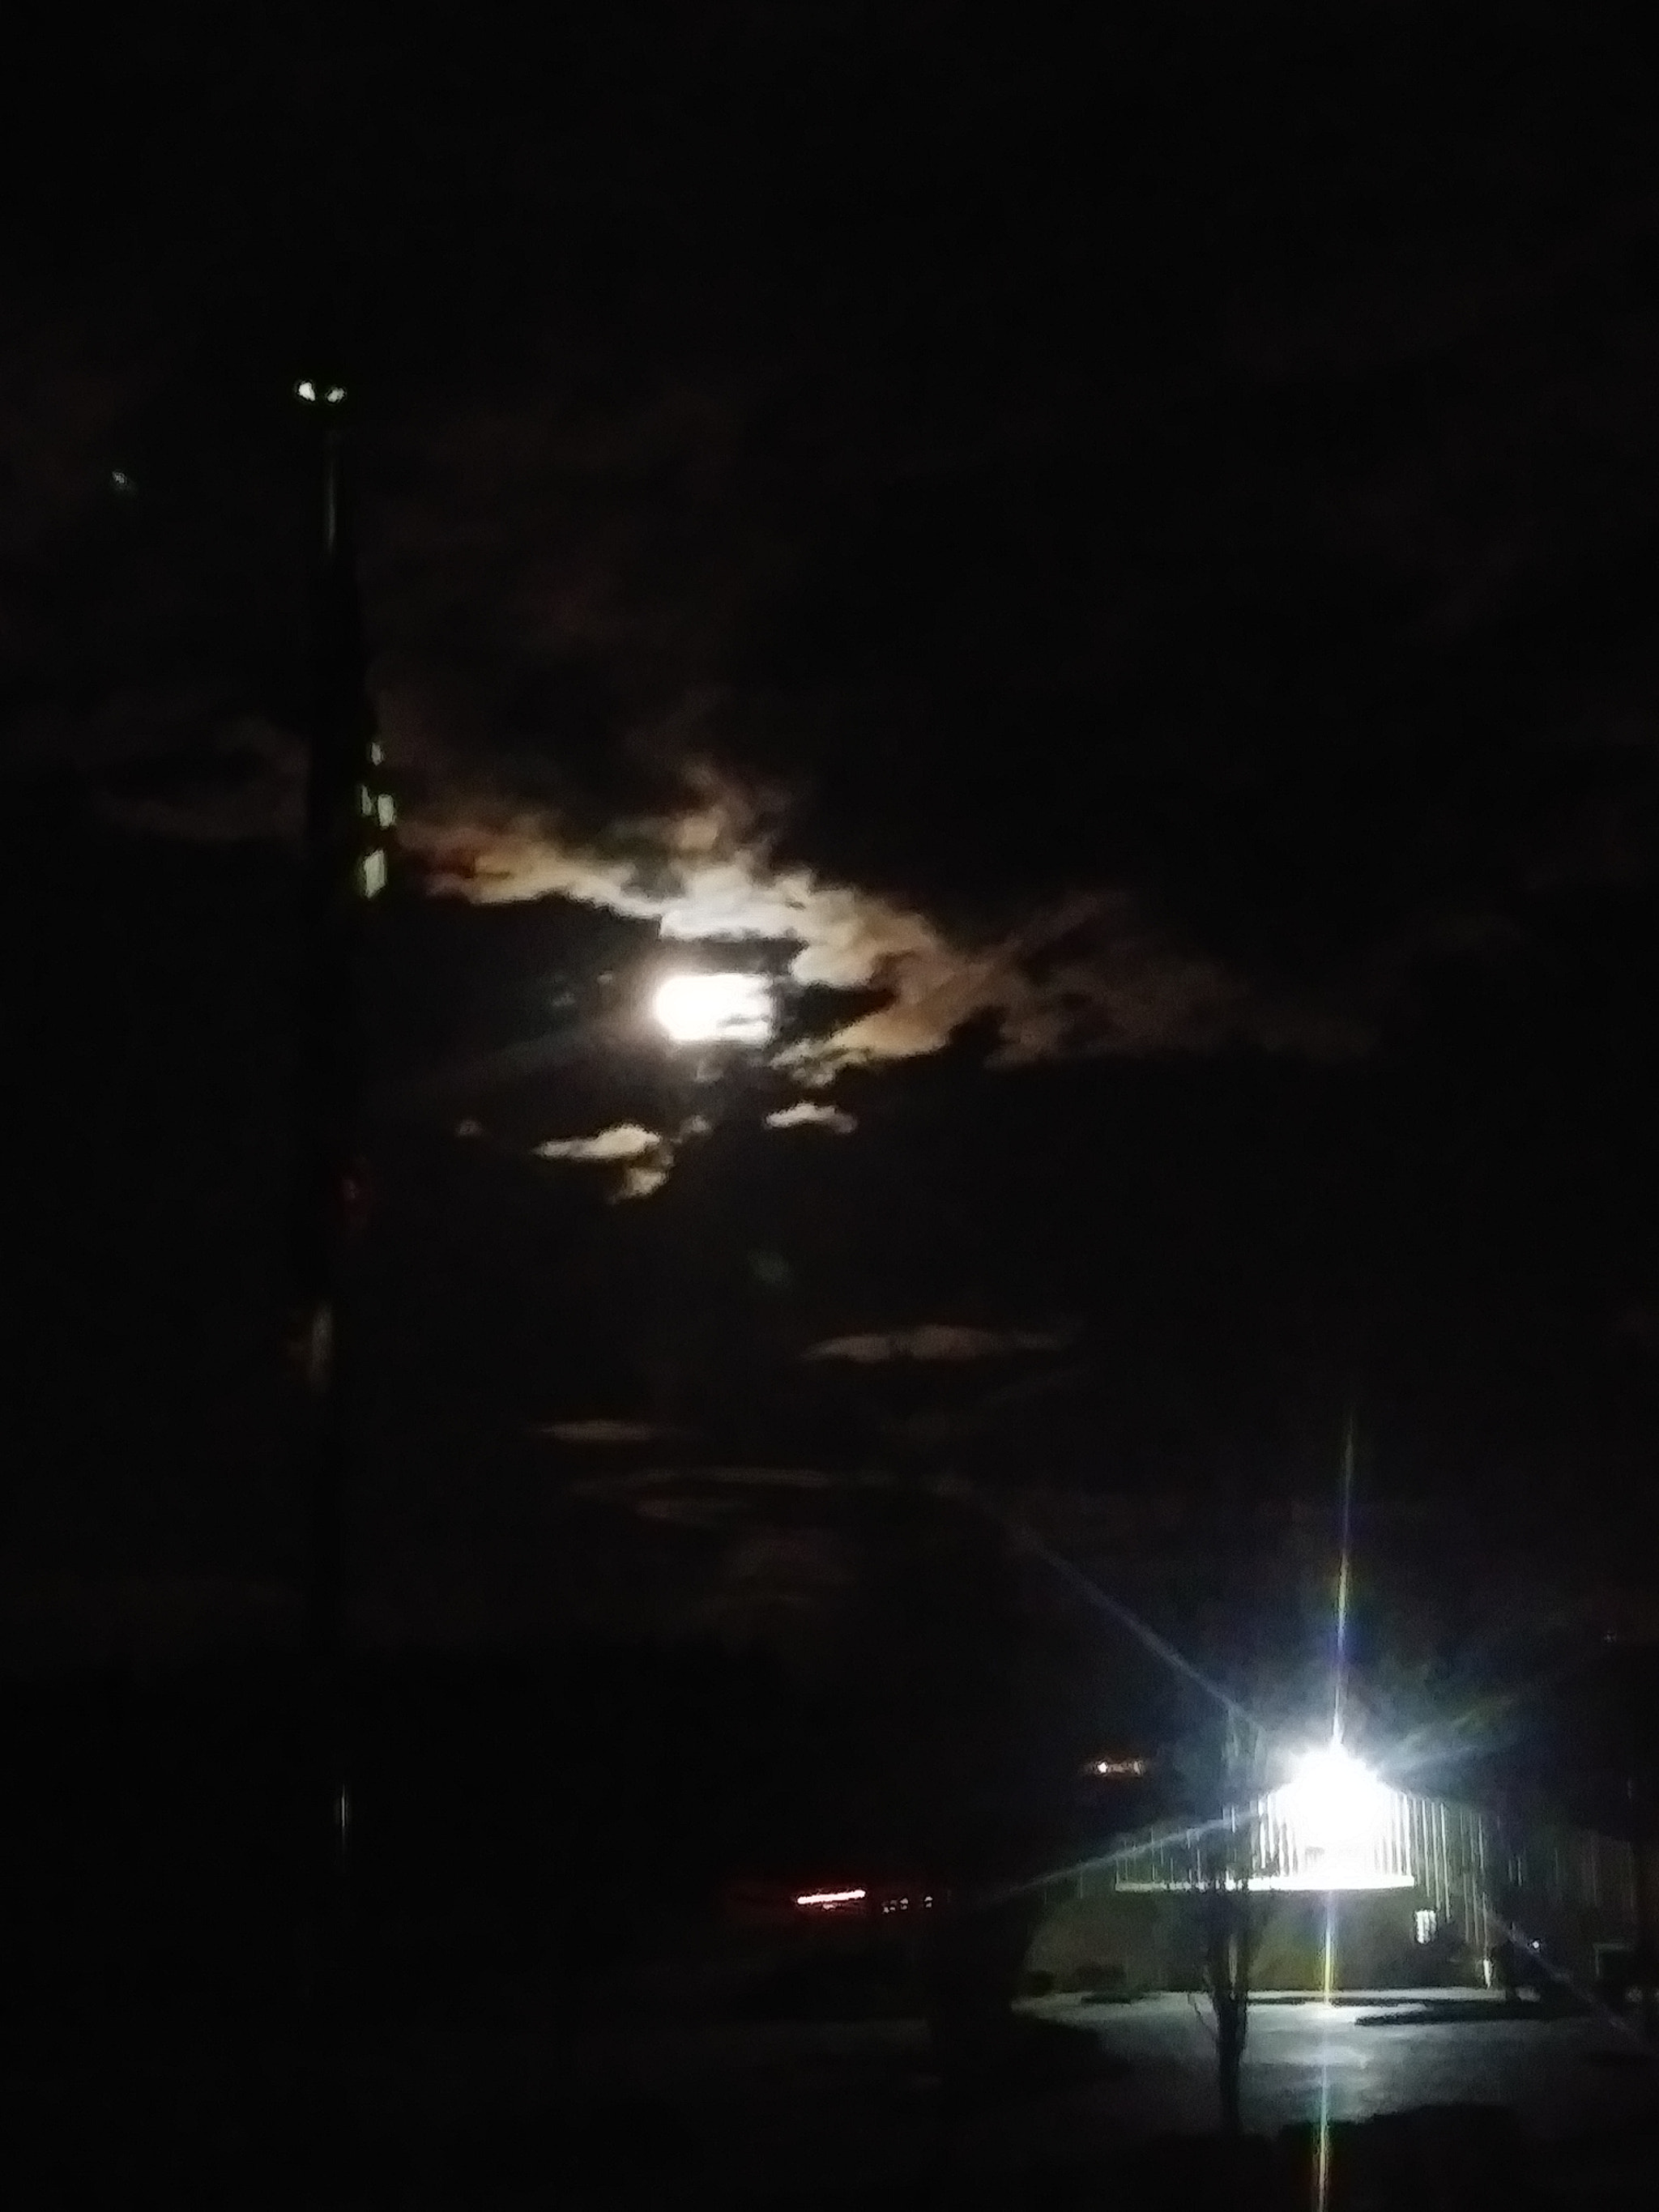 LG K20 PLUS sample photo. Watching the moon photography